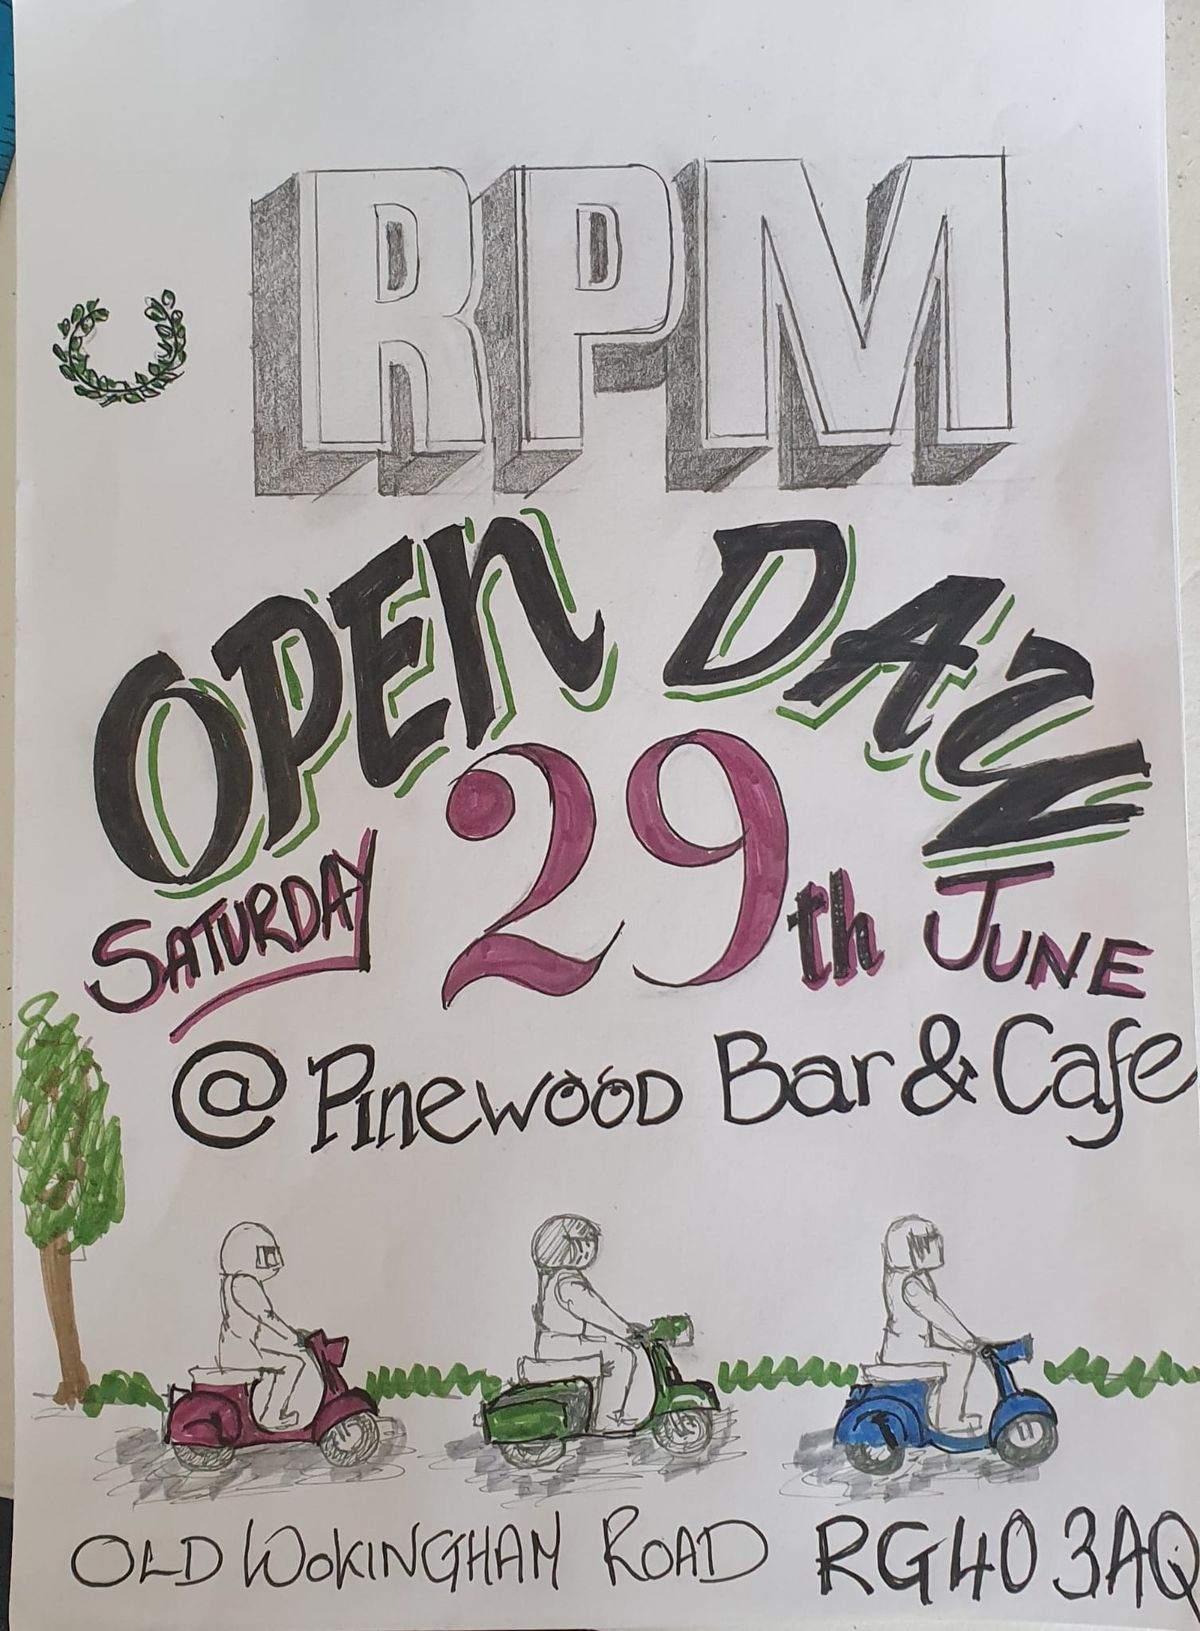 RPM OPEN DAY 